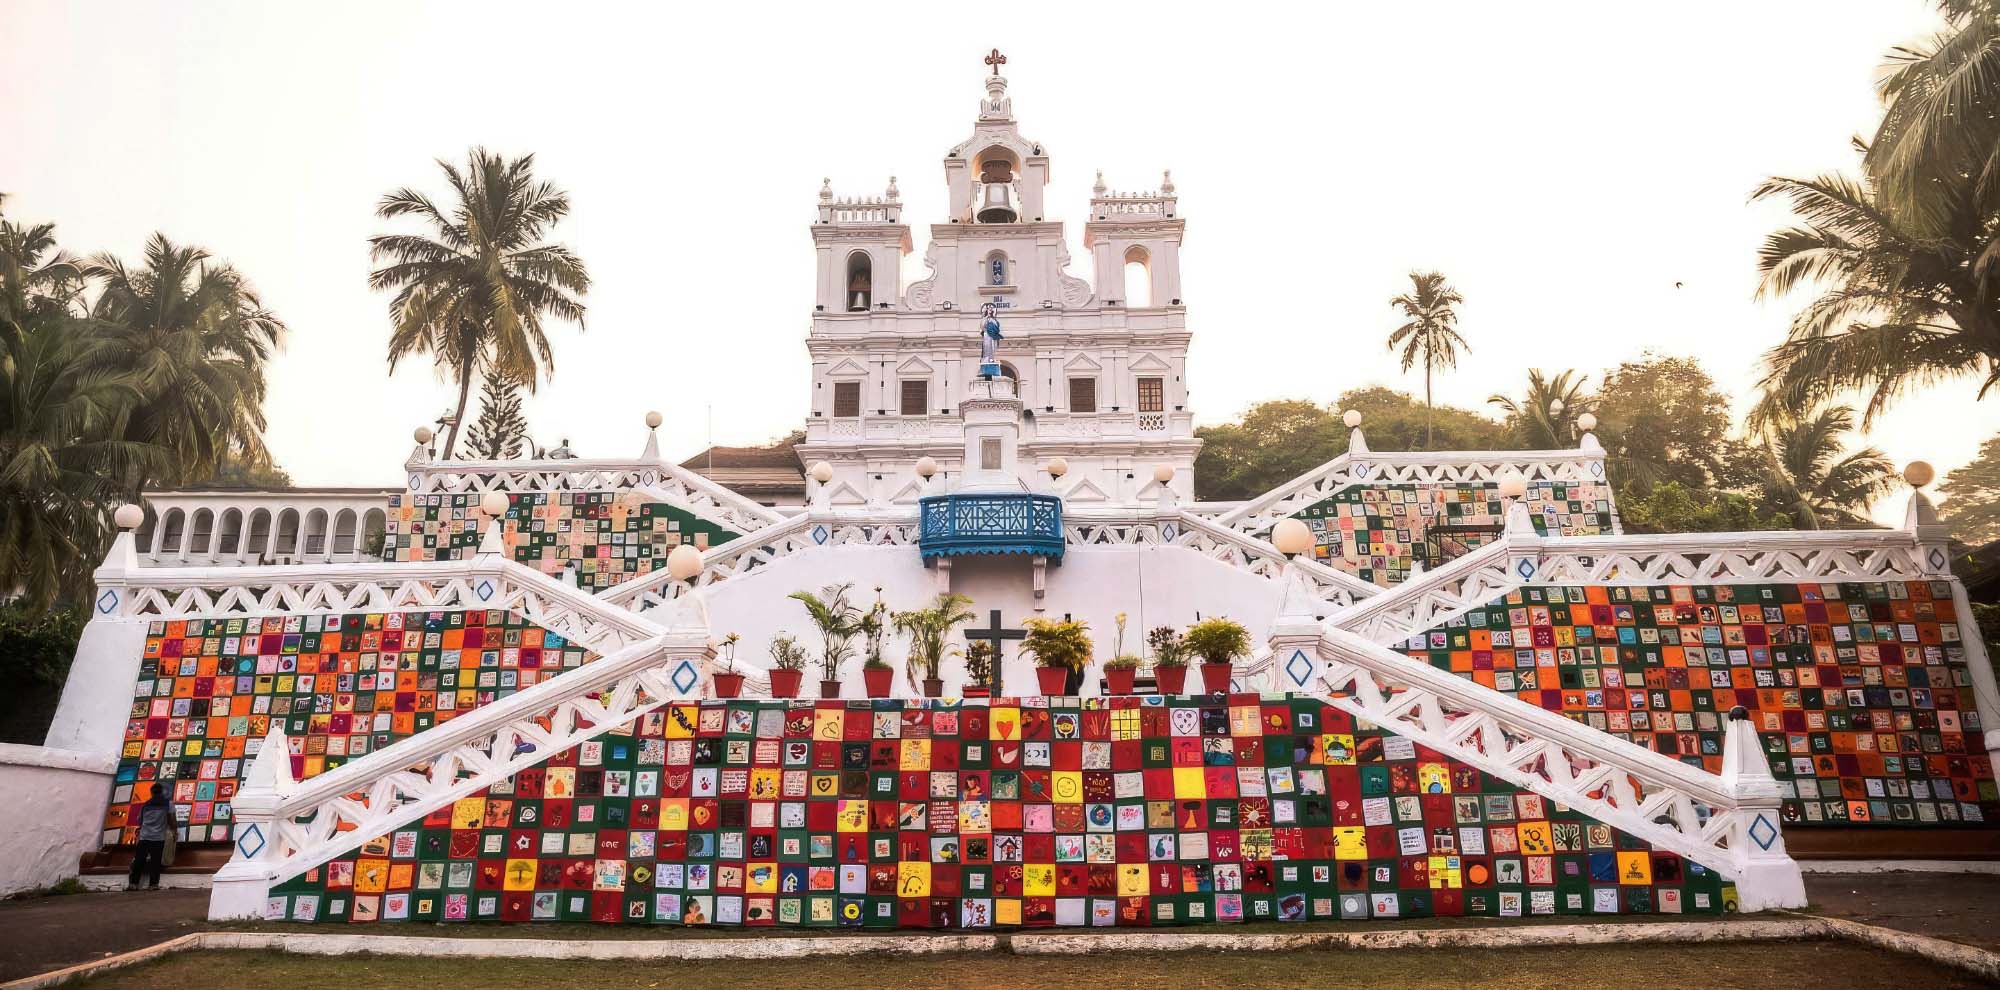 The front facade of a white church building is covered on different levels with a quilt made up of small colourful fabric squares.